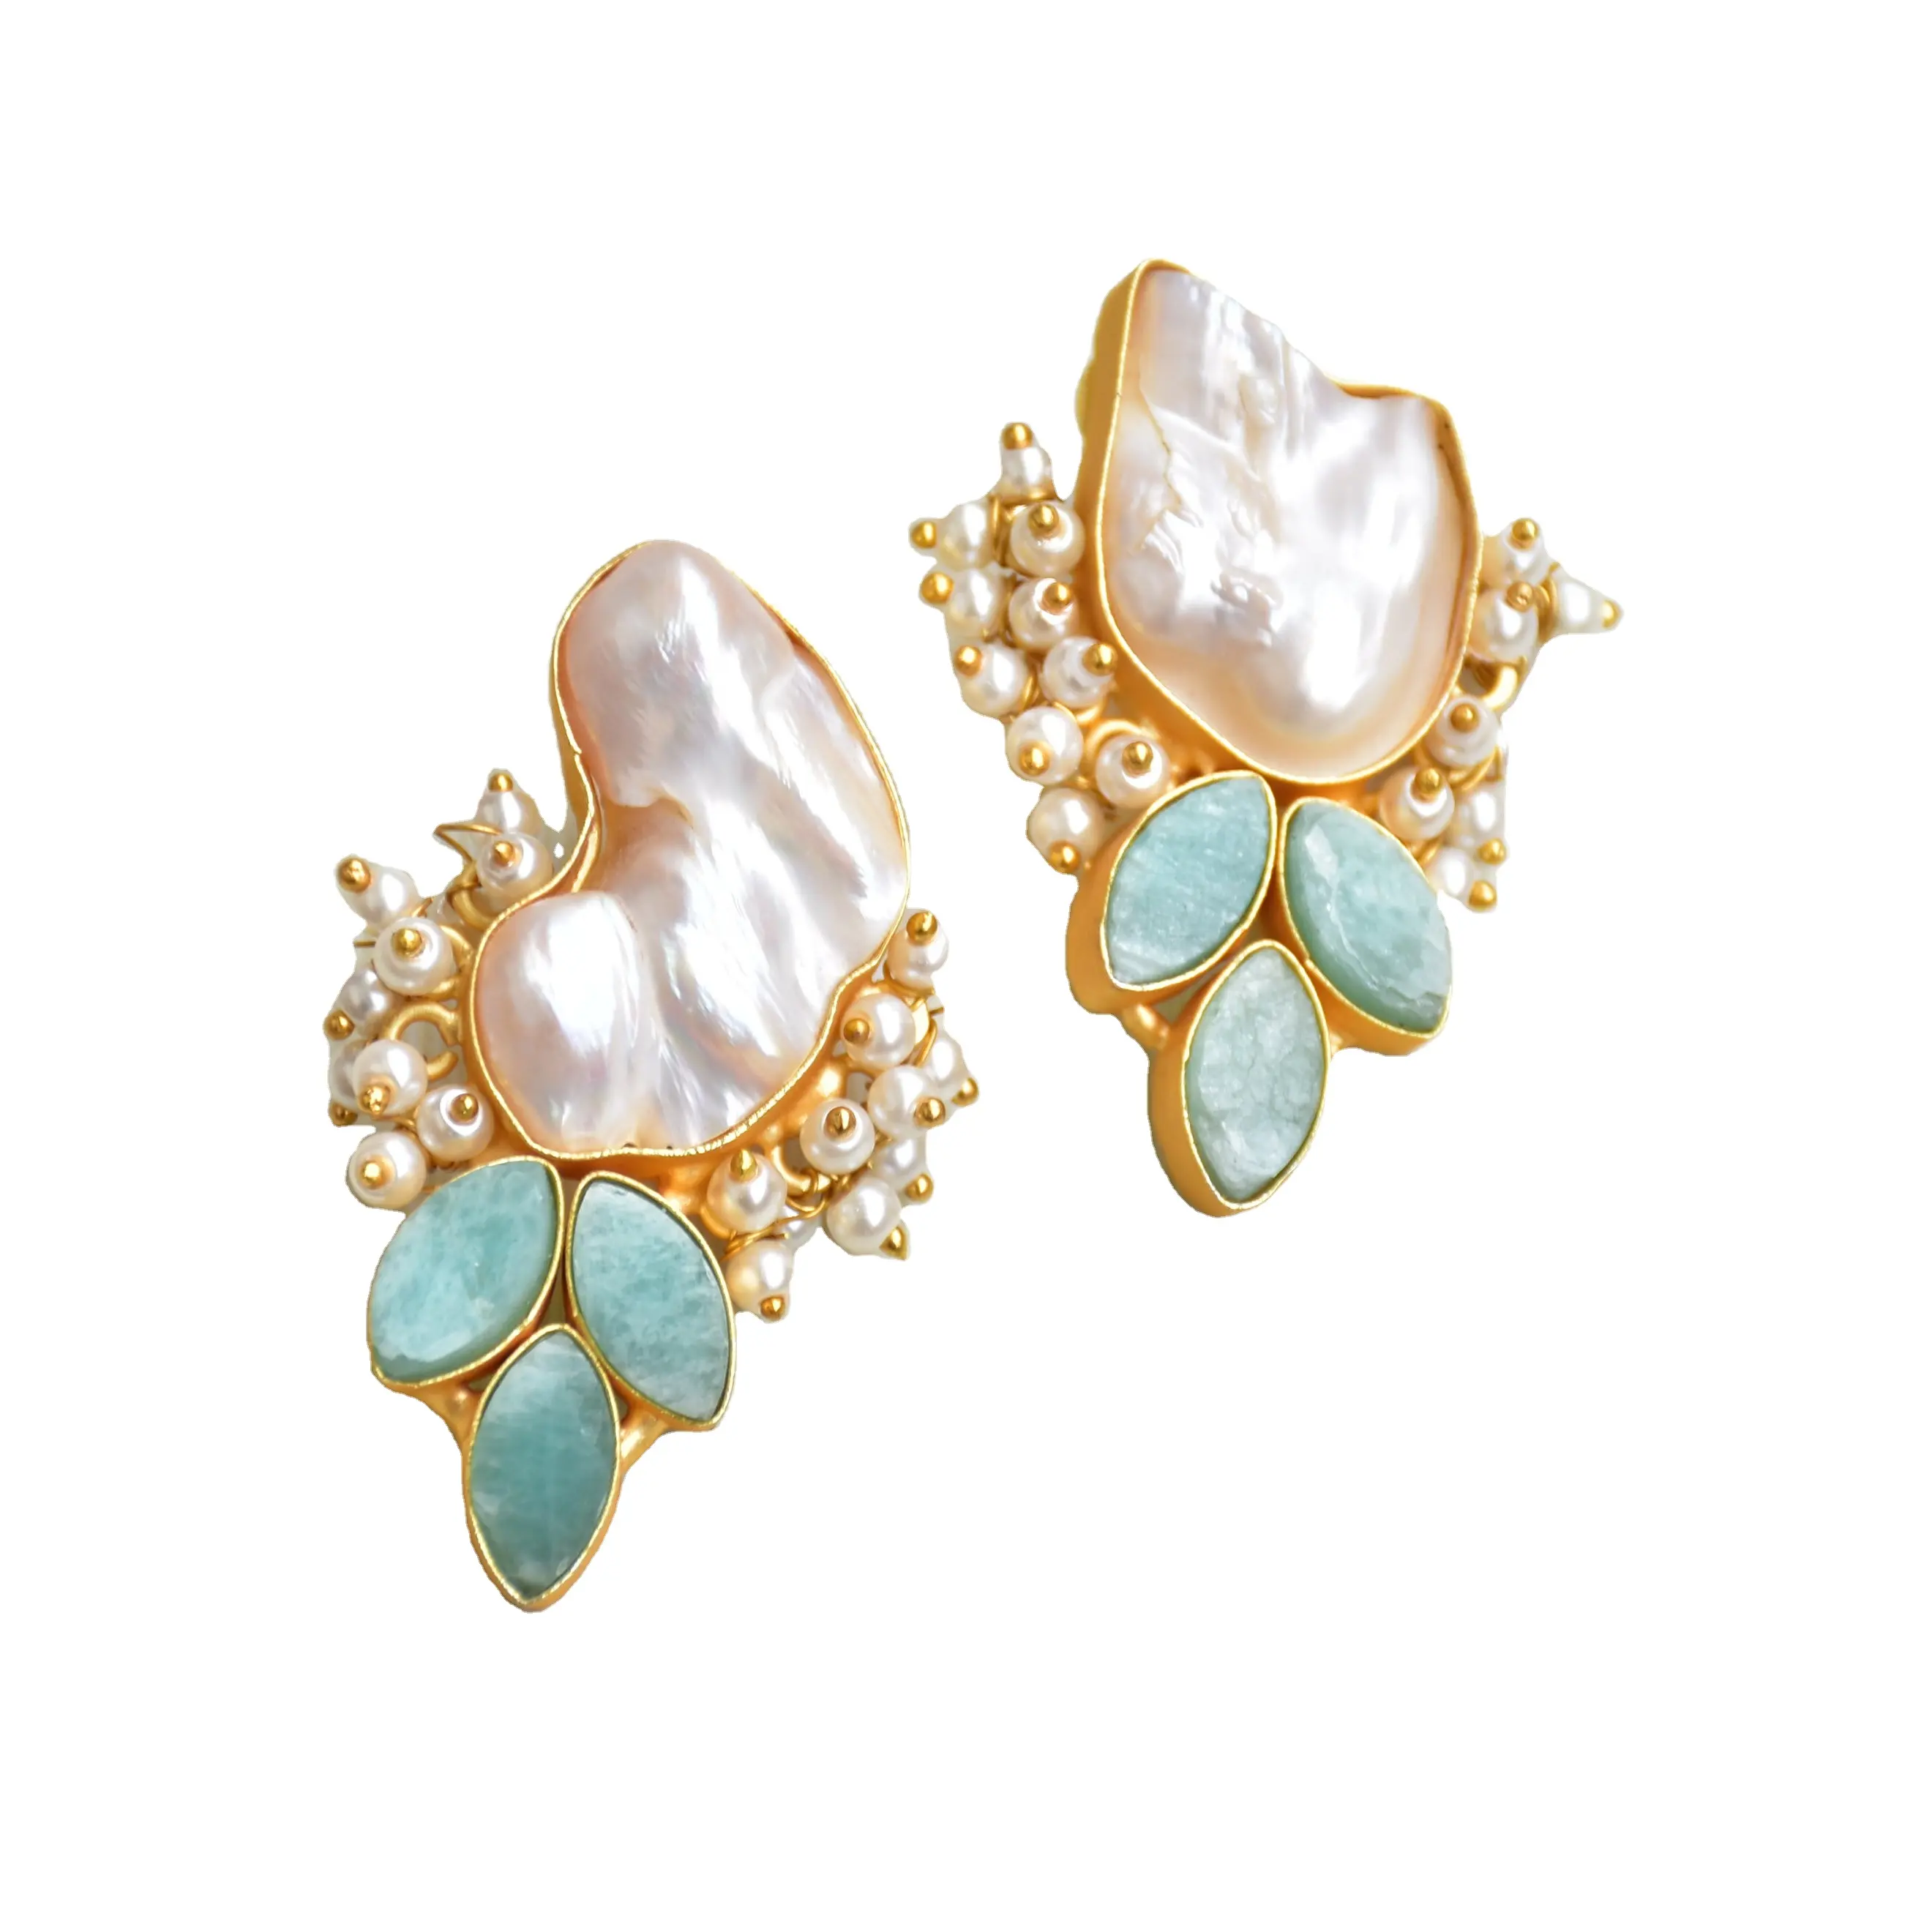 Statement Handmade Wedding Earrings for Brides Baroque Pearl trendy designs Jewelry for women Semi-precious stone studs